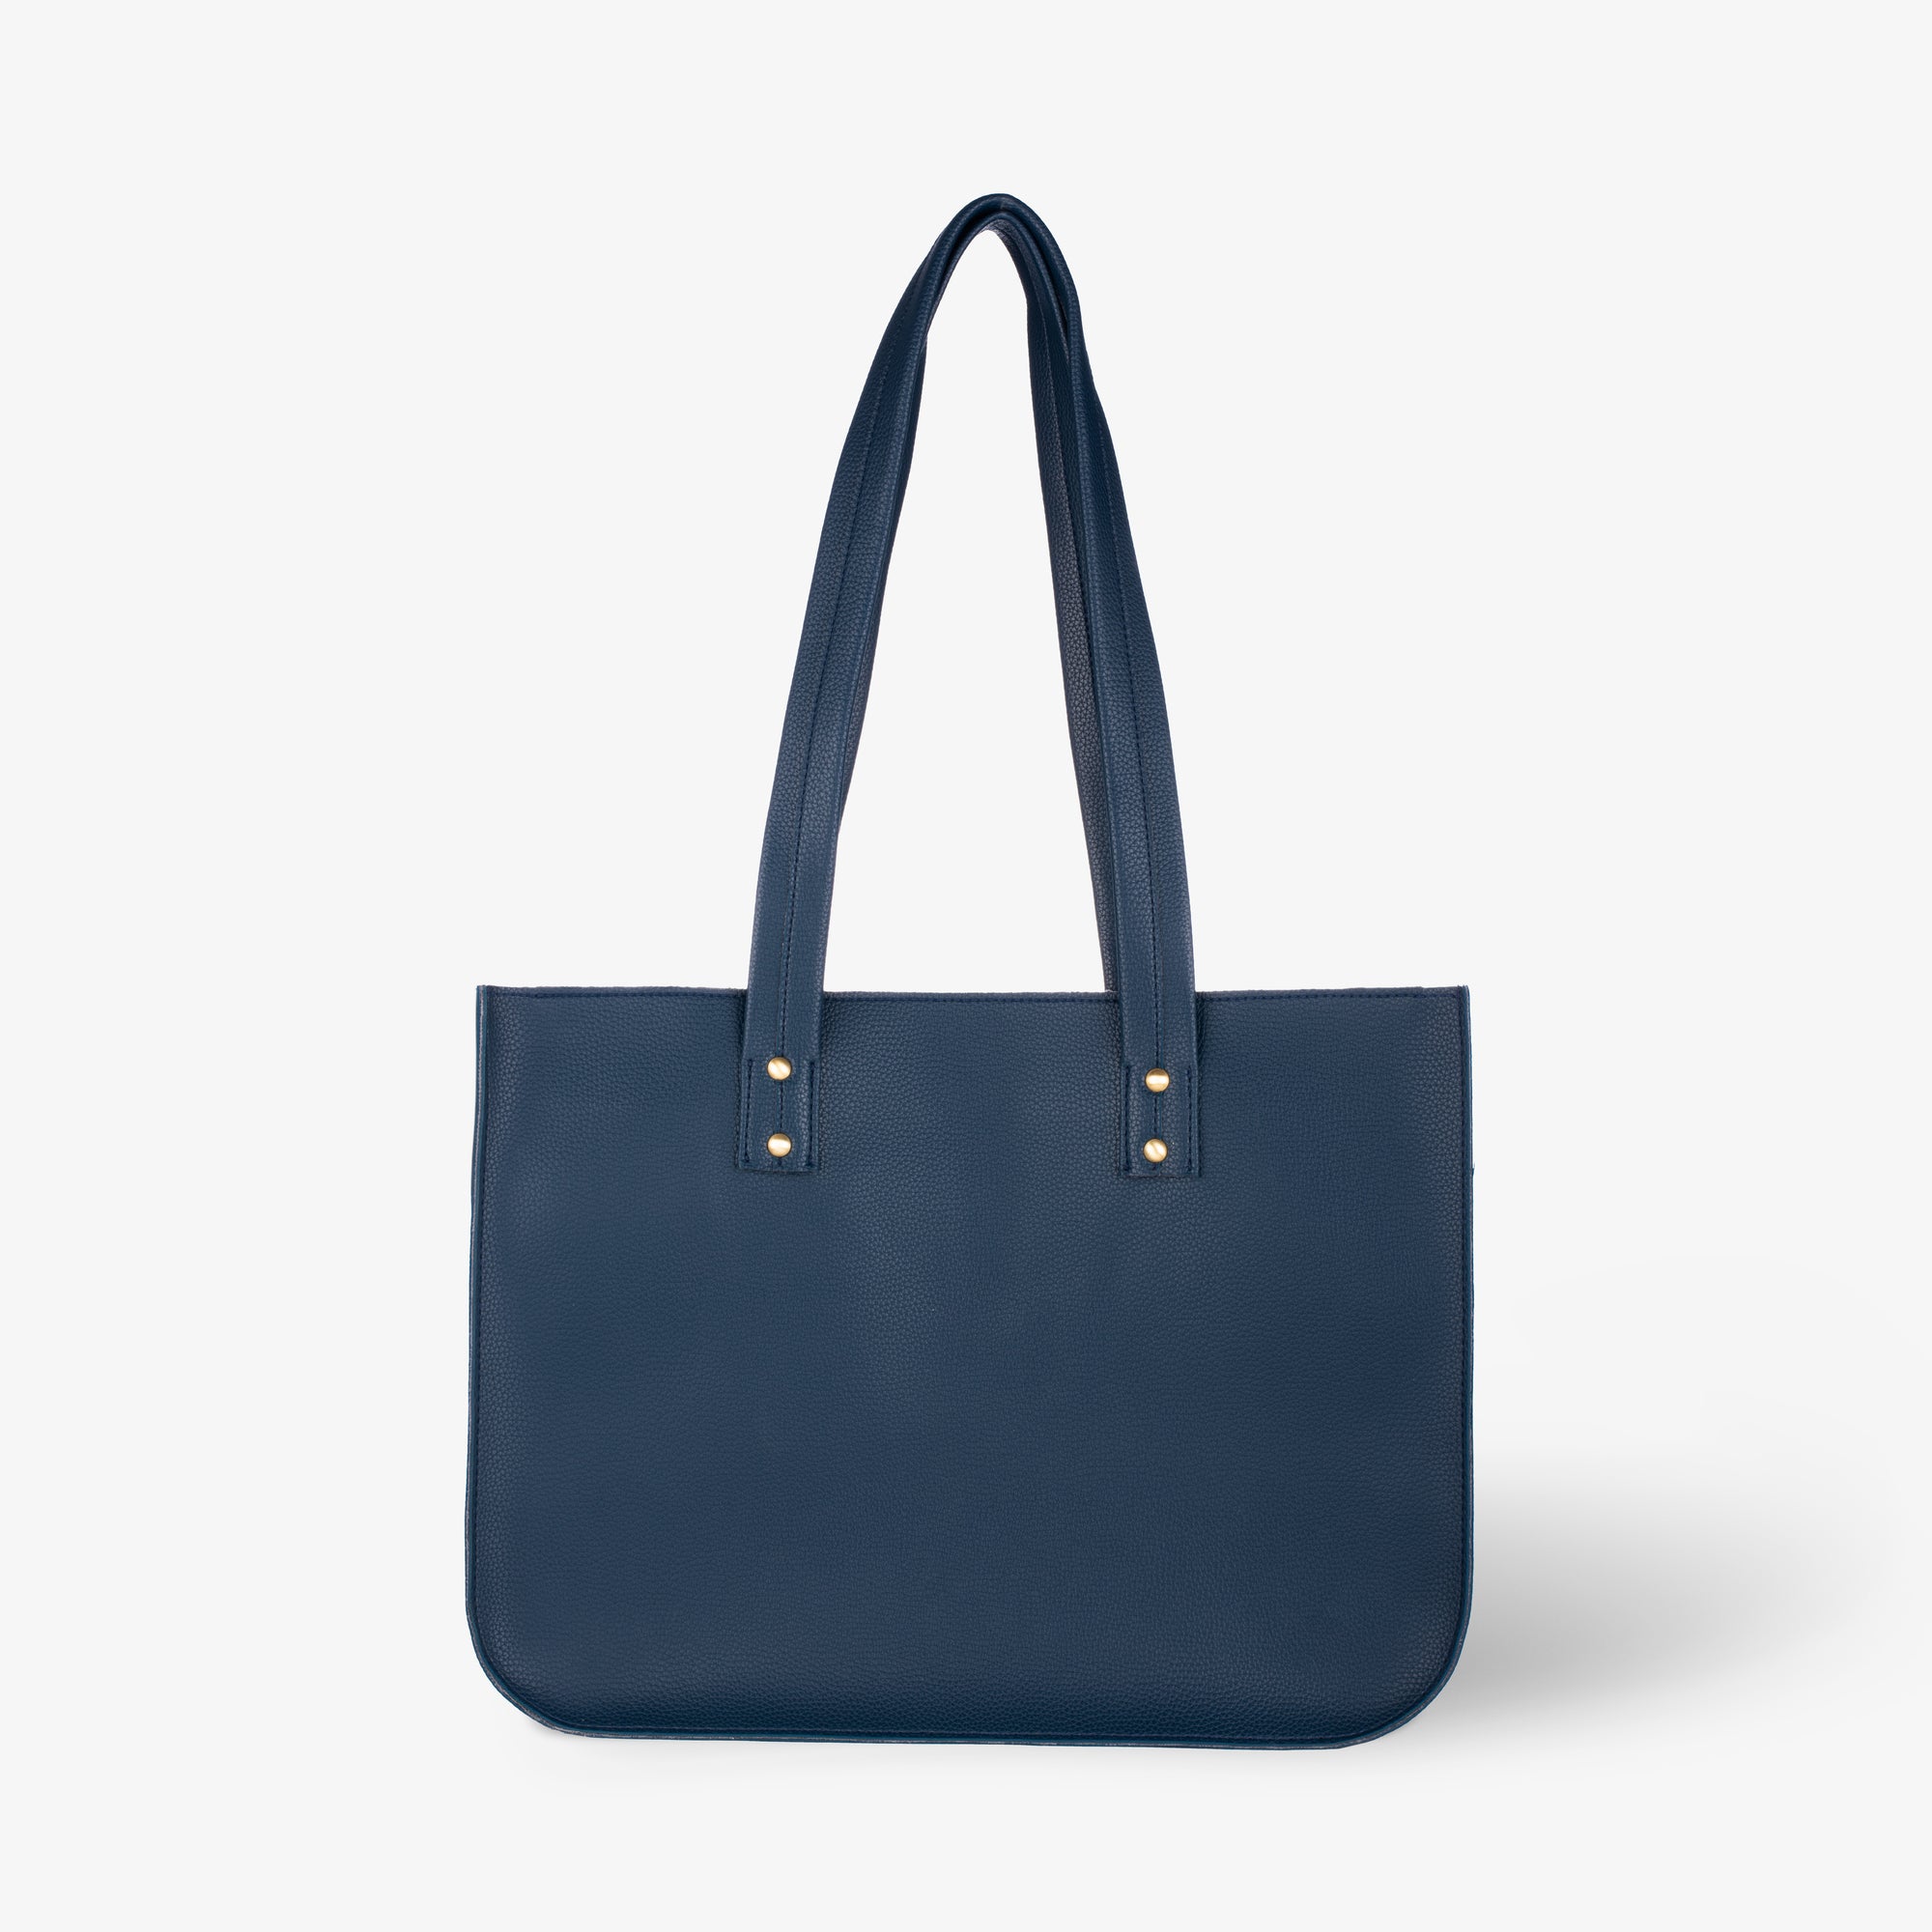 vegan leather tote bags for women